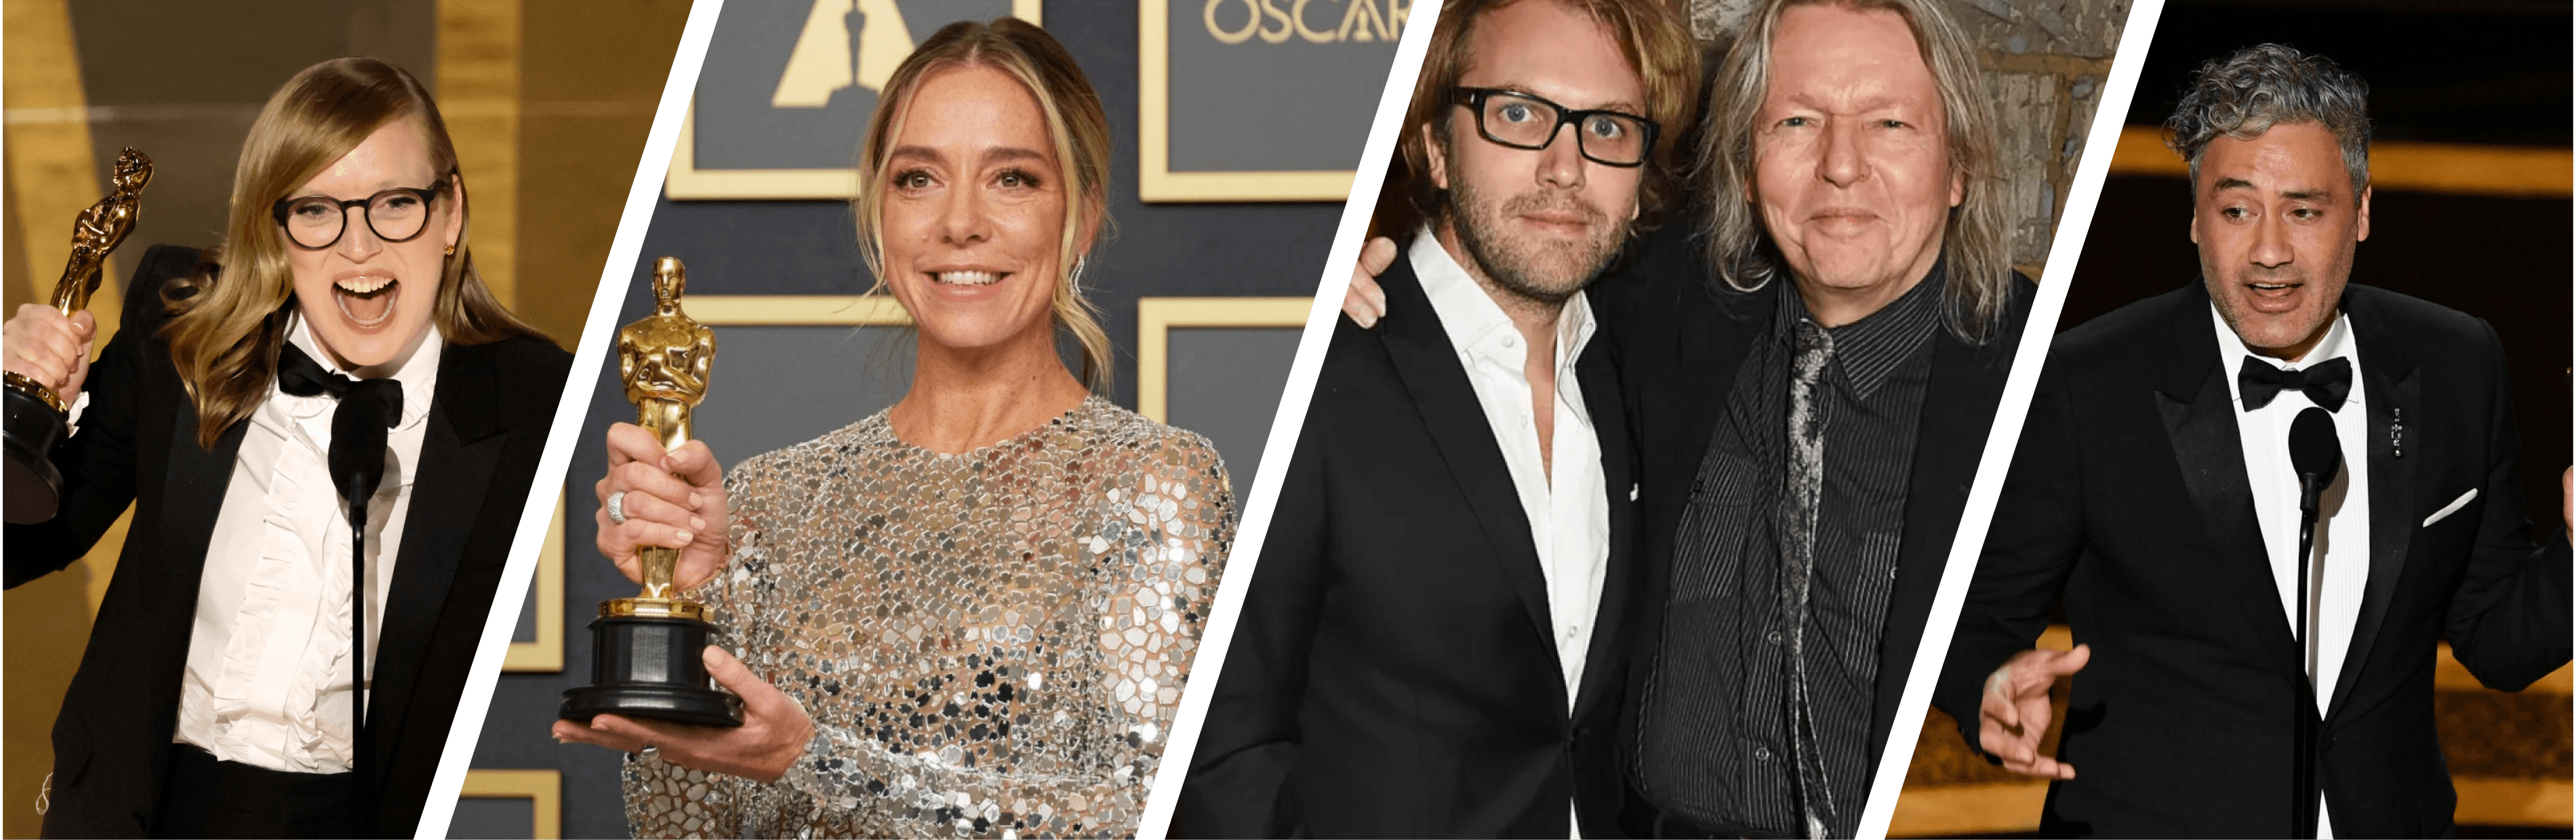 Photo depicts Oscar® winners from 2019-2023. Kevin Winter/Getty Images; Michael Baker/AMPAS; David M. Benett/Getty Images; Rob Latour/Shutterstock)